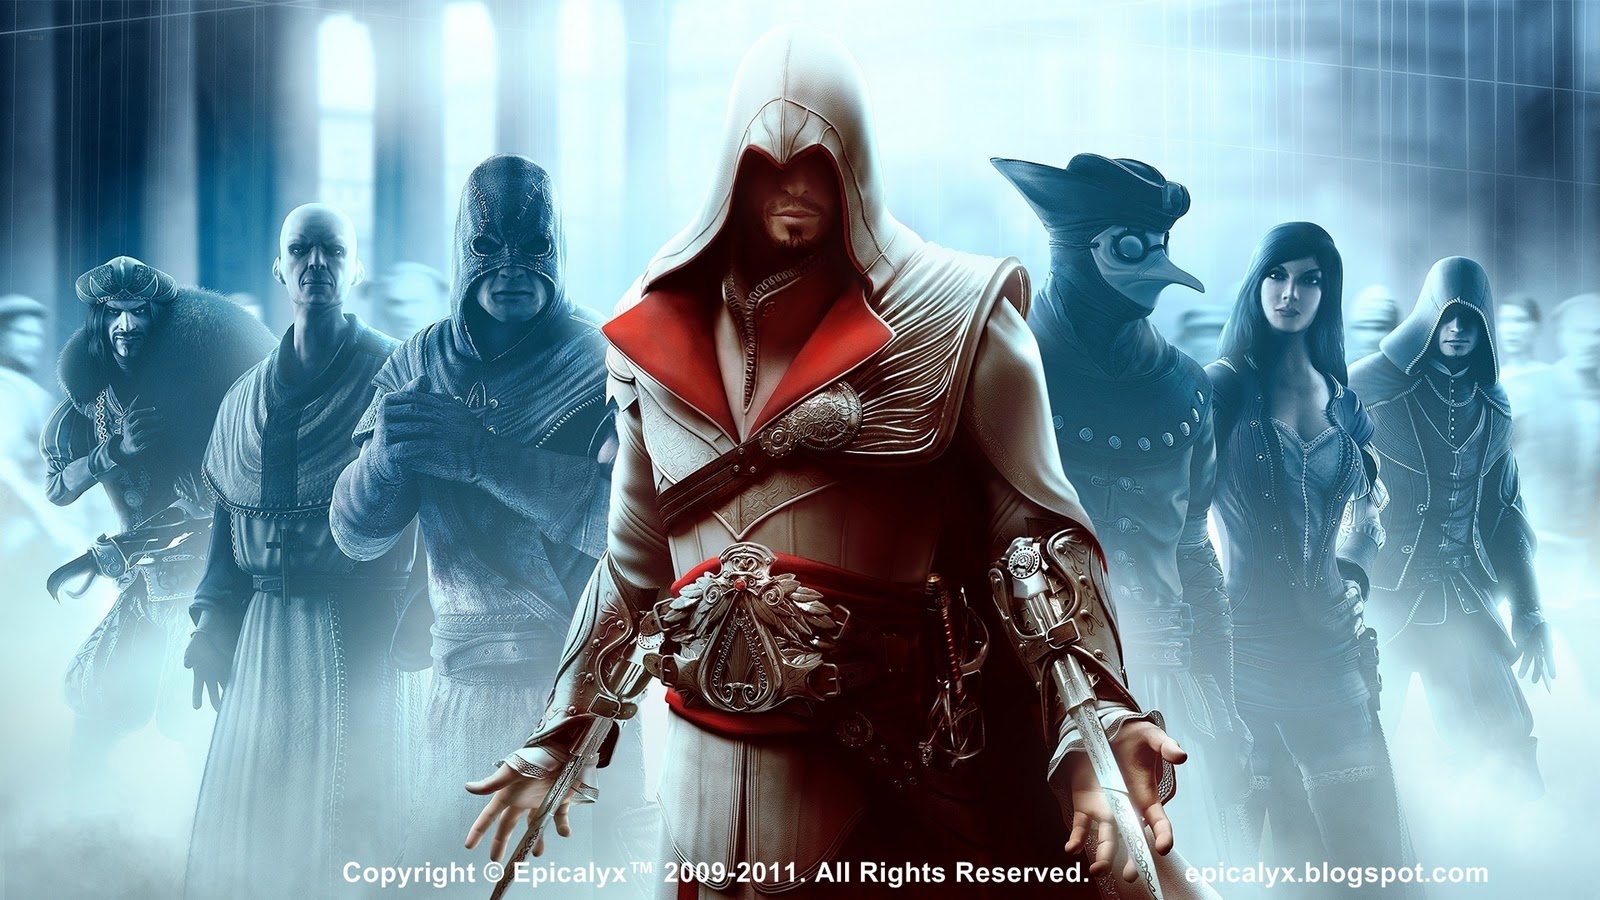 Epicalyx: Assassin's Creed - Wallpapers